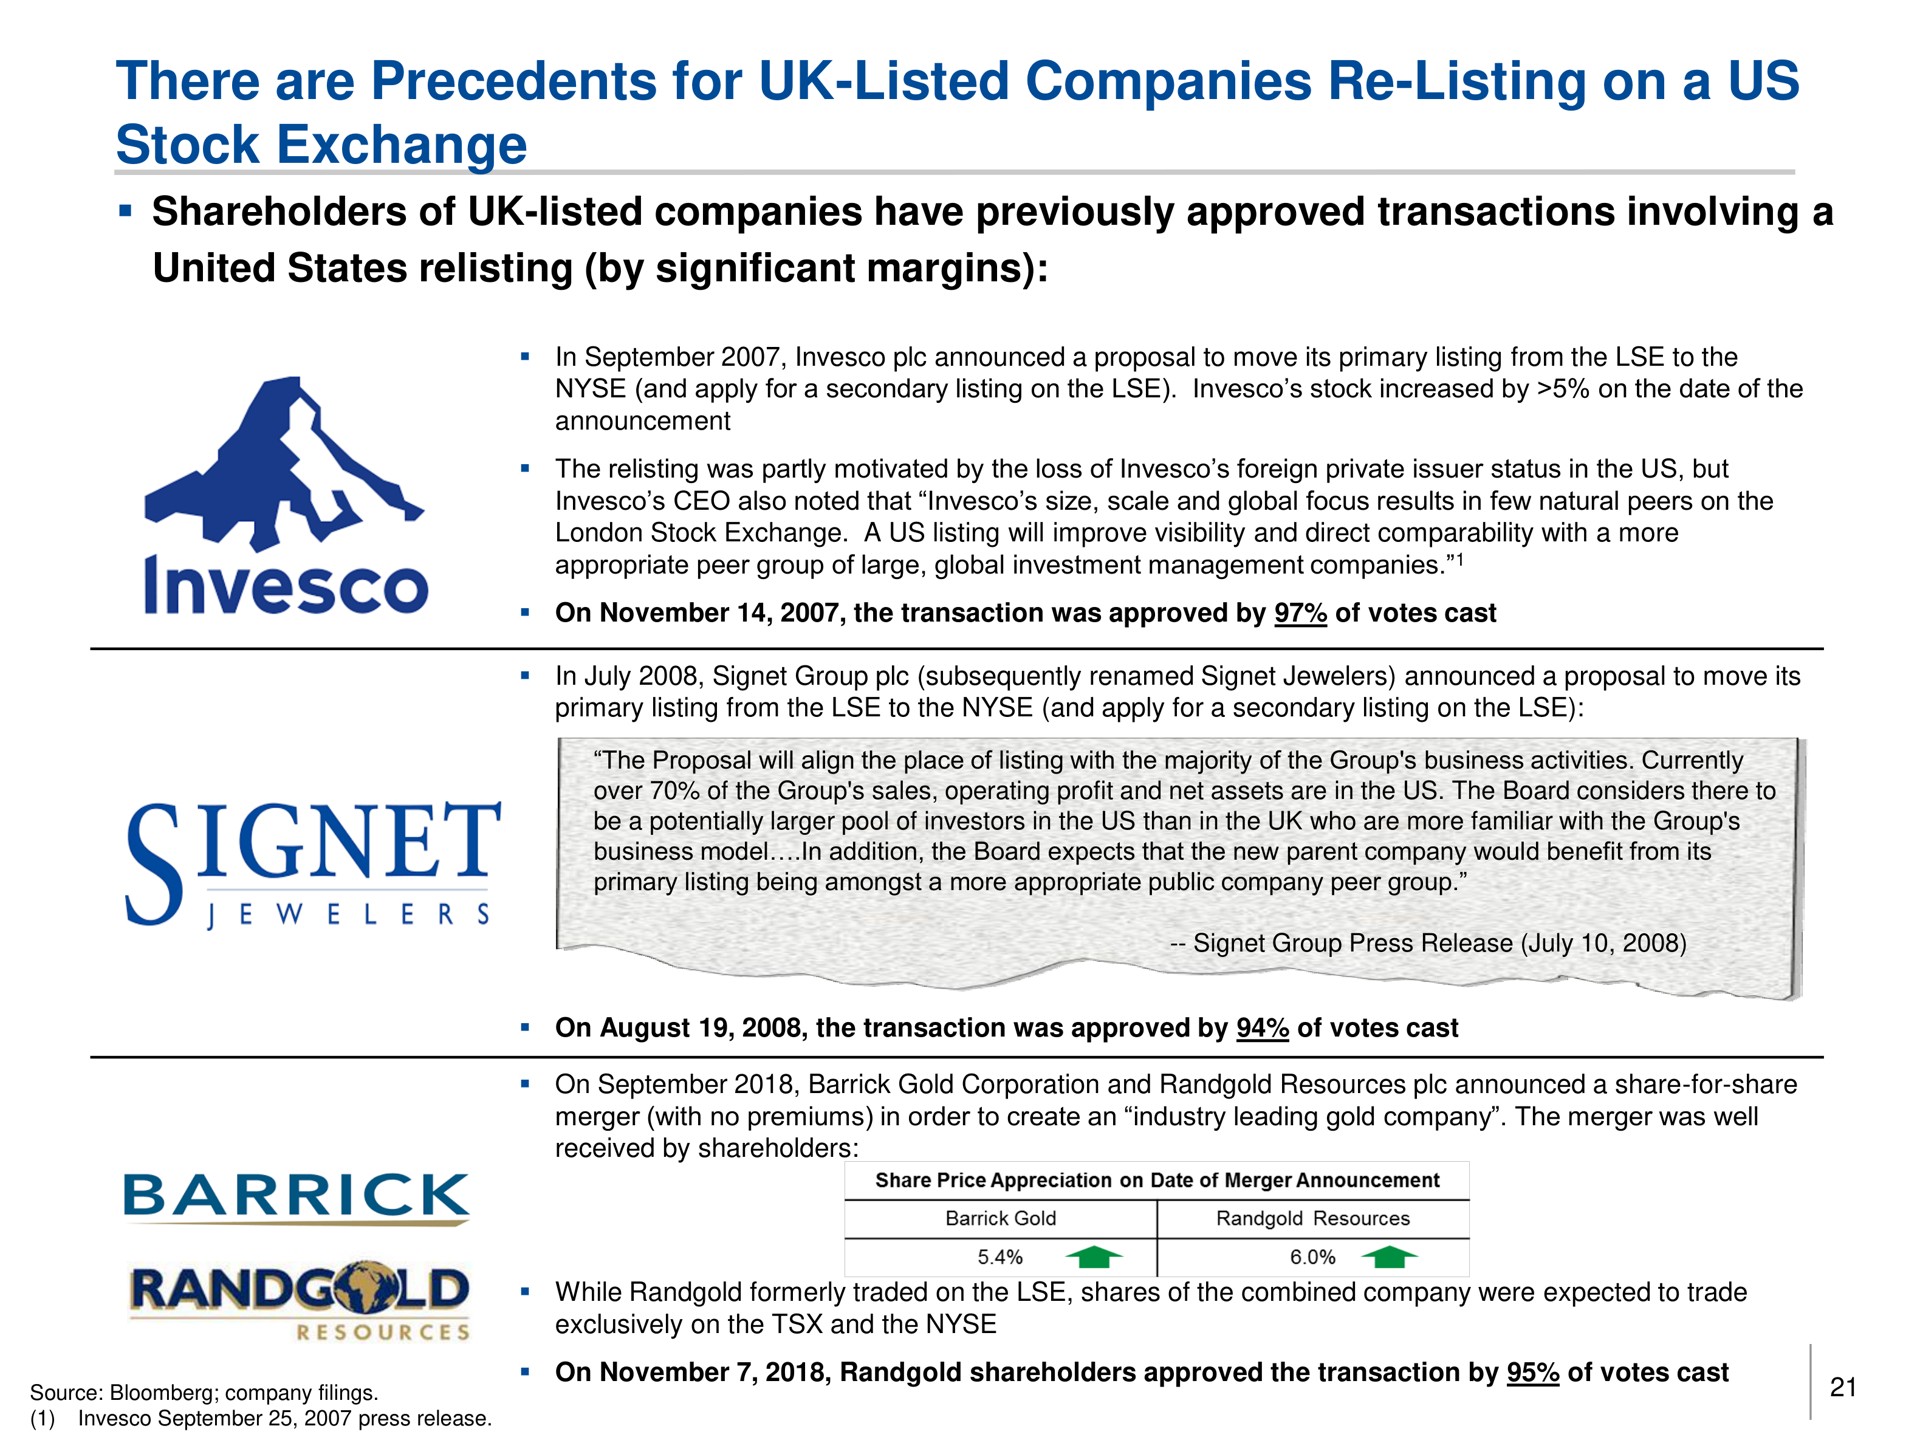 there are precedents for listed companies listing on a us stock exchange | Trian Partners